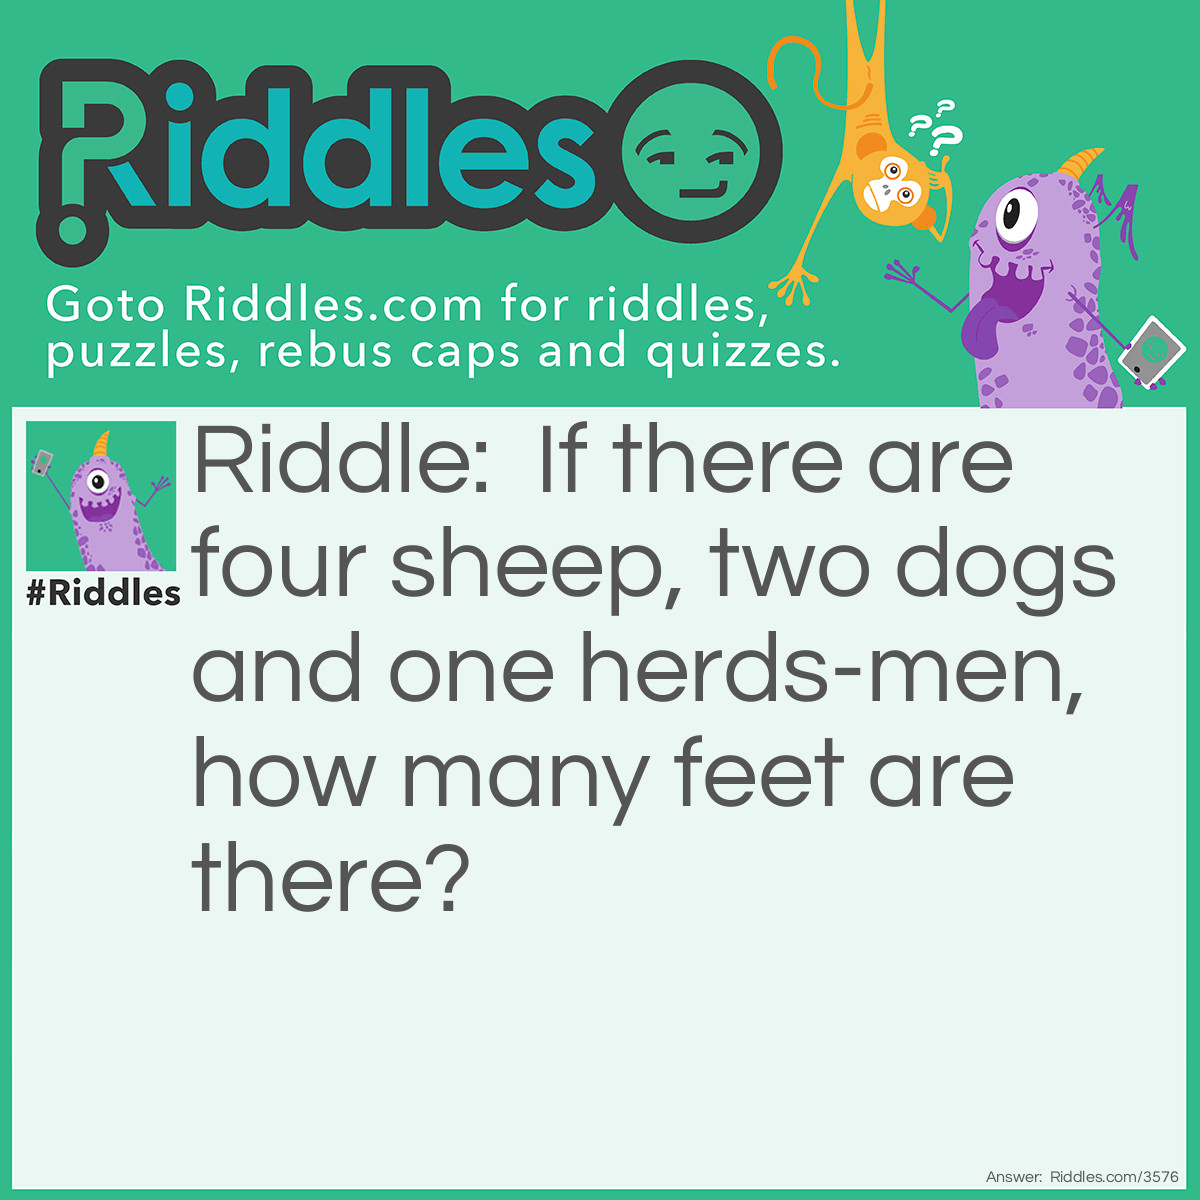 Riddle: If there are four sheep, two dogs and one herds-men, how many feet are there? Answer: Two. Sheep have hooves; dogs have paws; only people have feet.